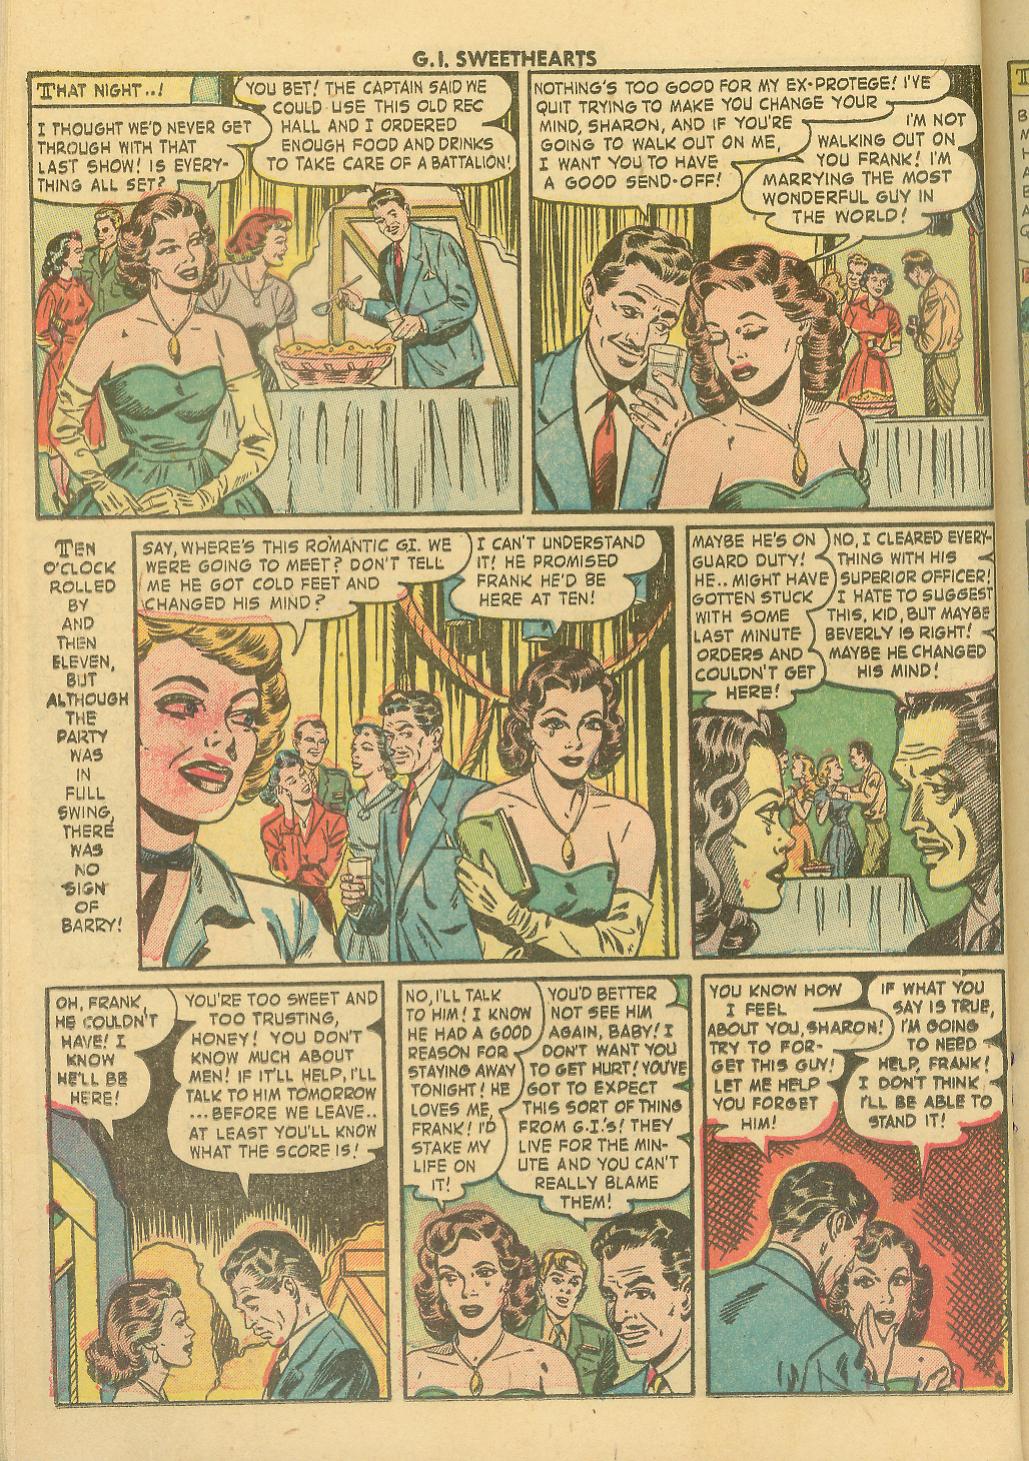 Read online G.I. Sweethearts comic -  Issue #34 - 14